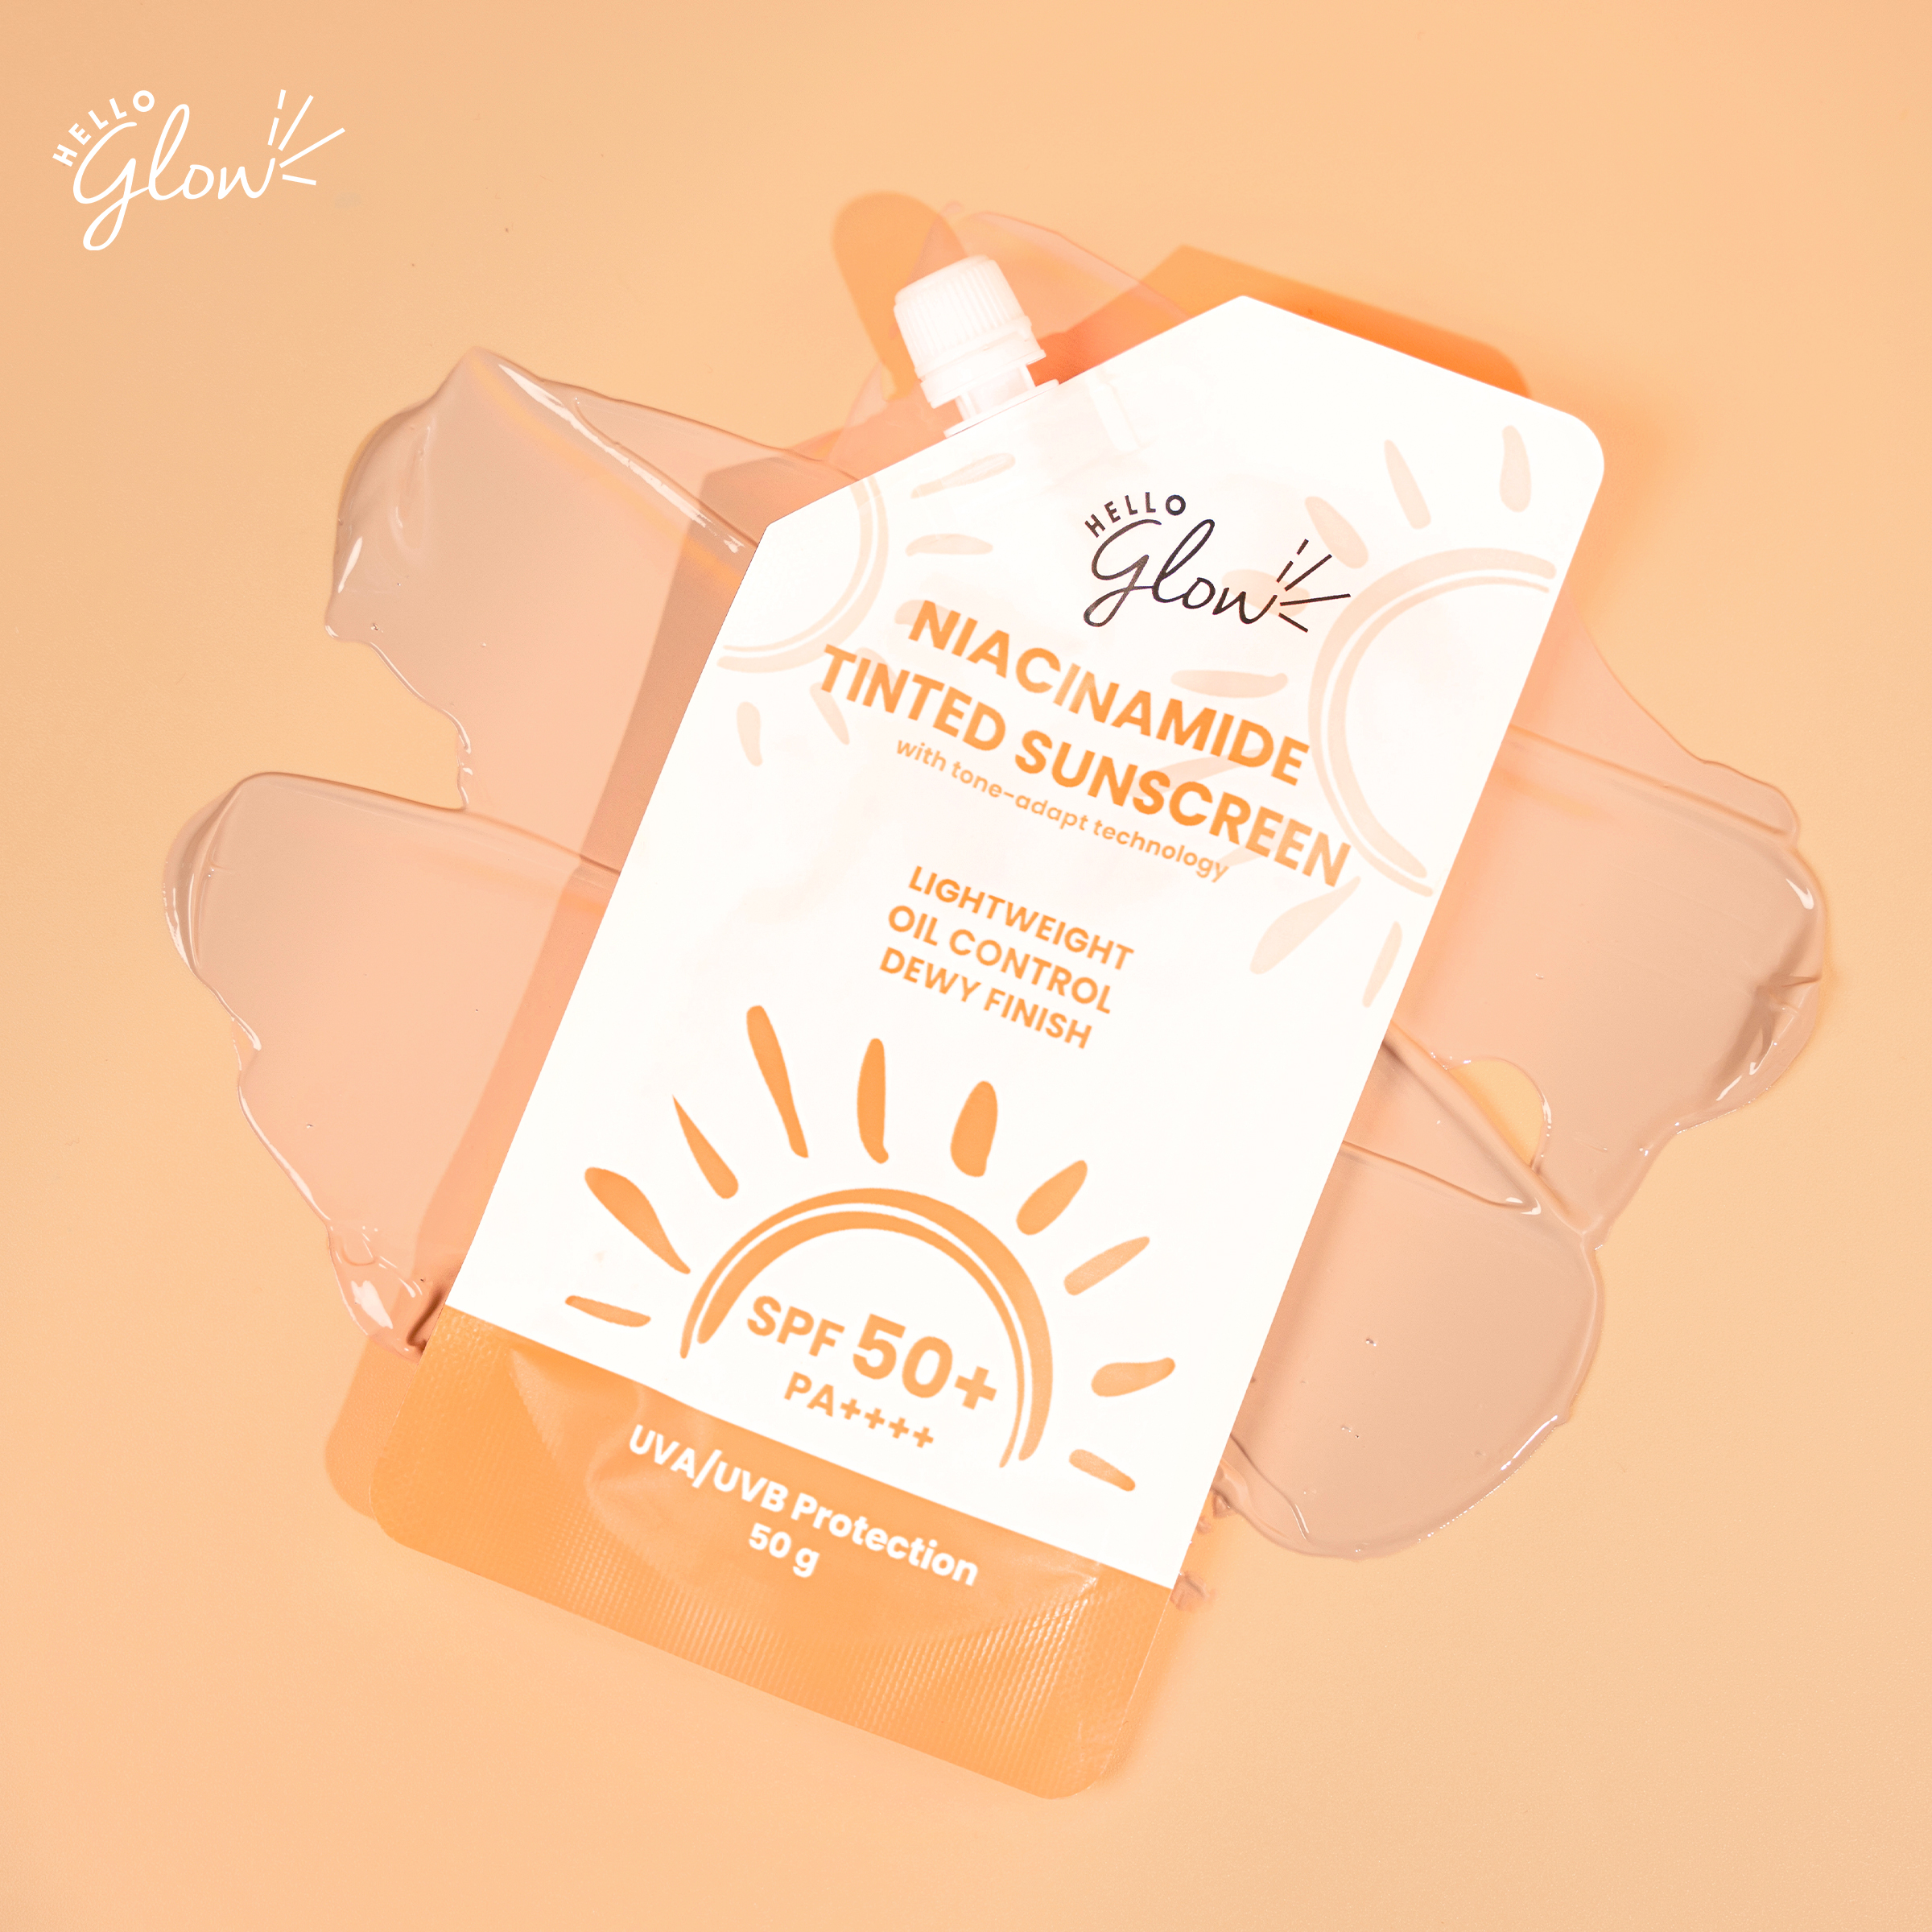 This Tinted Sunscreen Comes In Handy, Cute Packaging